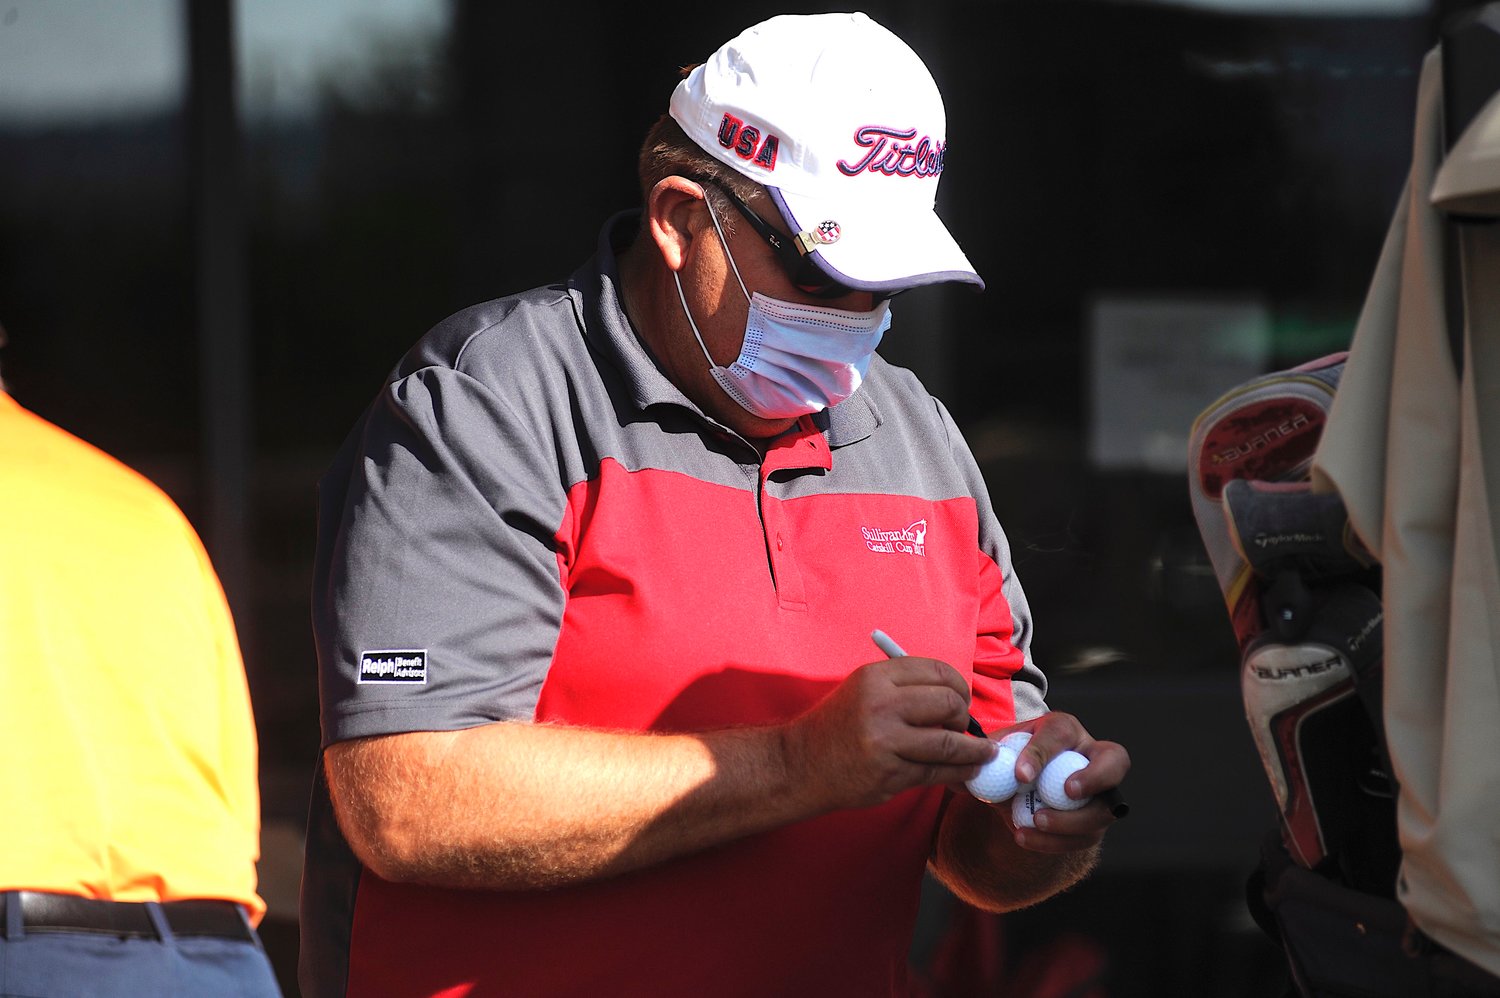 Last-minute details. Joe Burczak, on the team from Relph Benefit Advisors, initials his golf balls to keep track of them on the course.